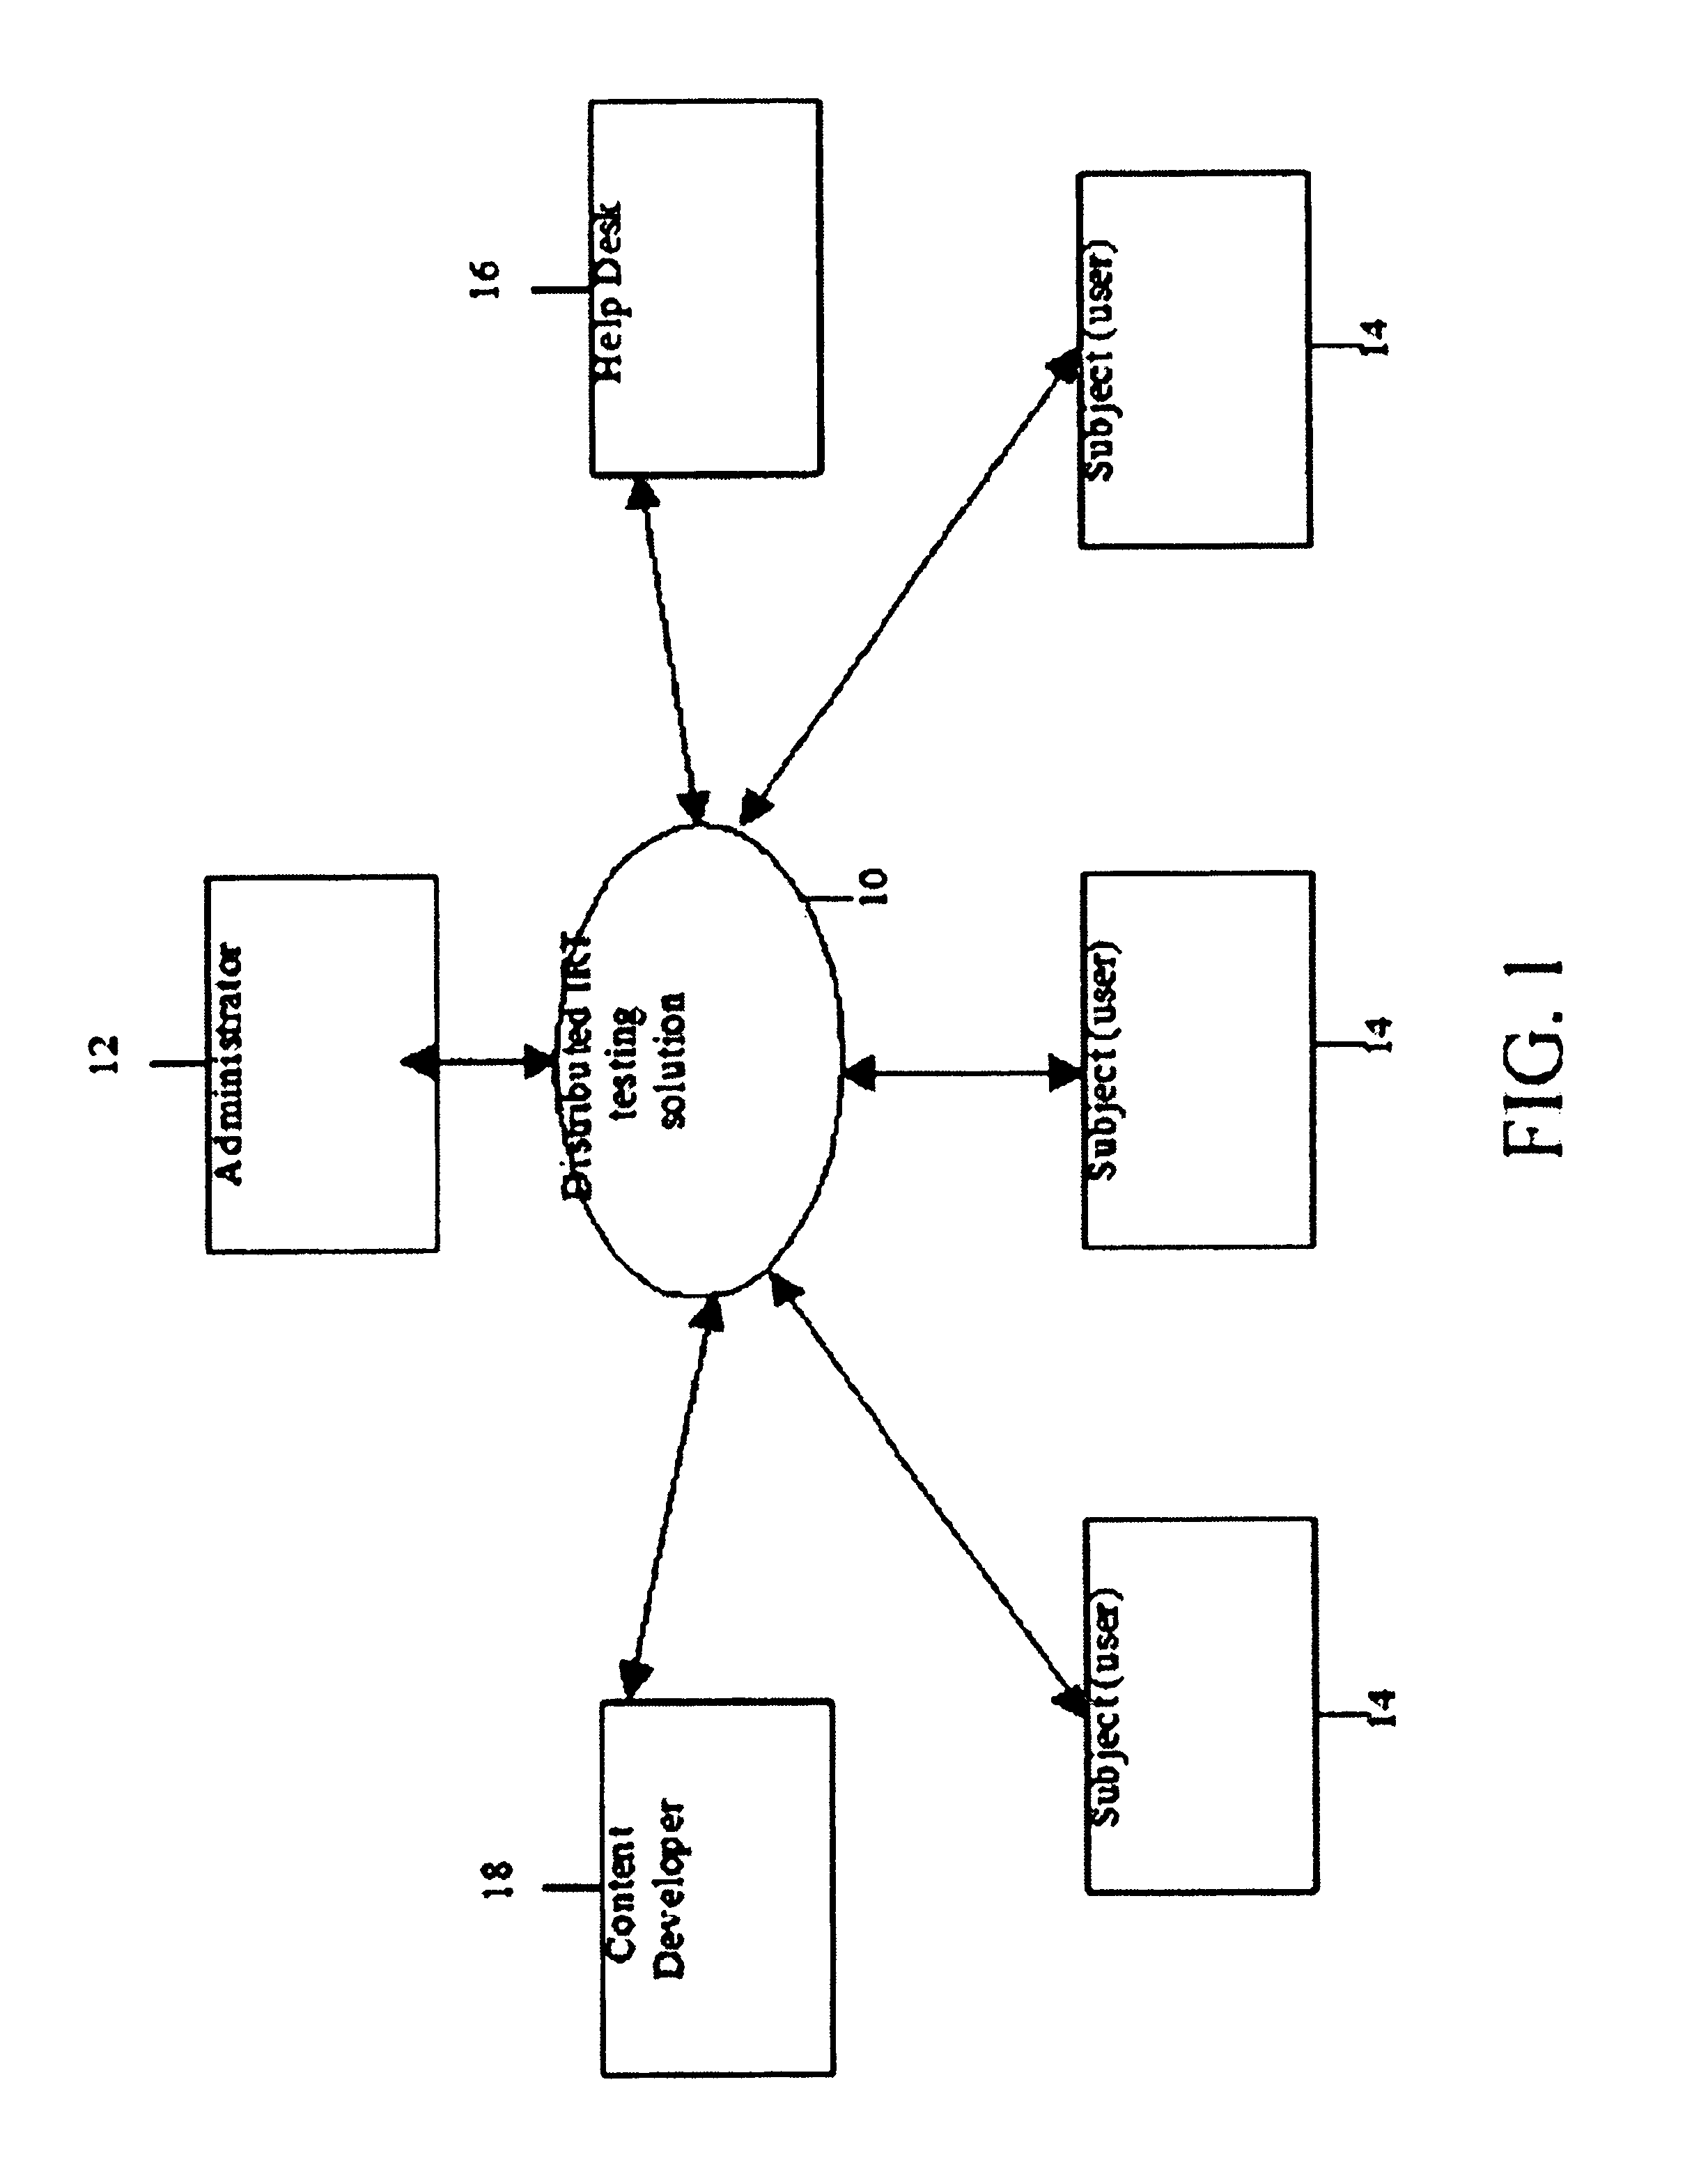 Method and system for knowledge assessment and learning incorporating feedbacks